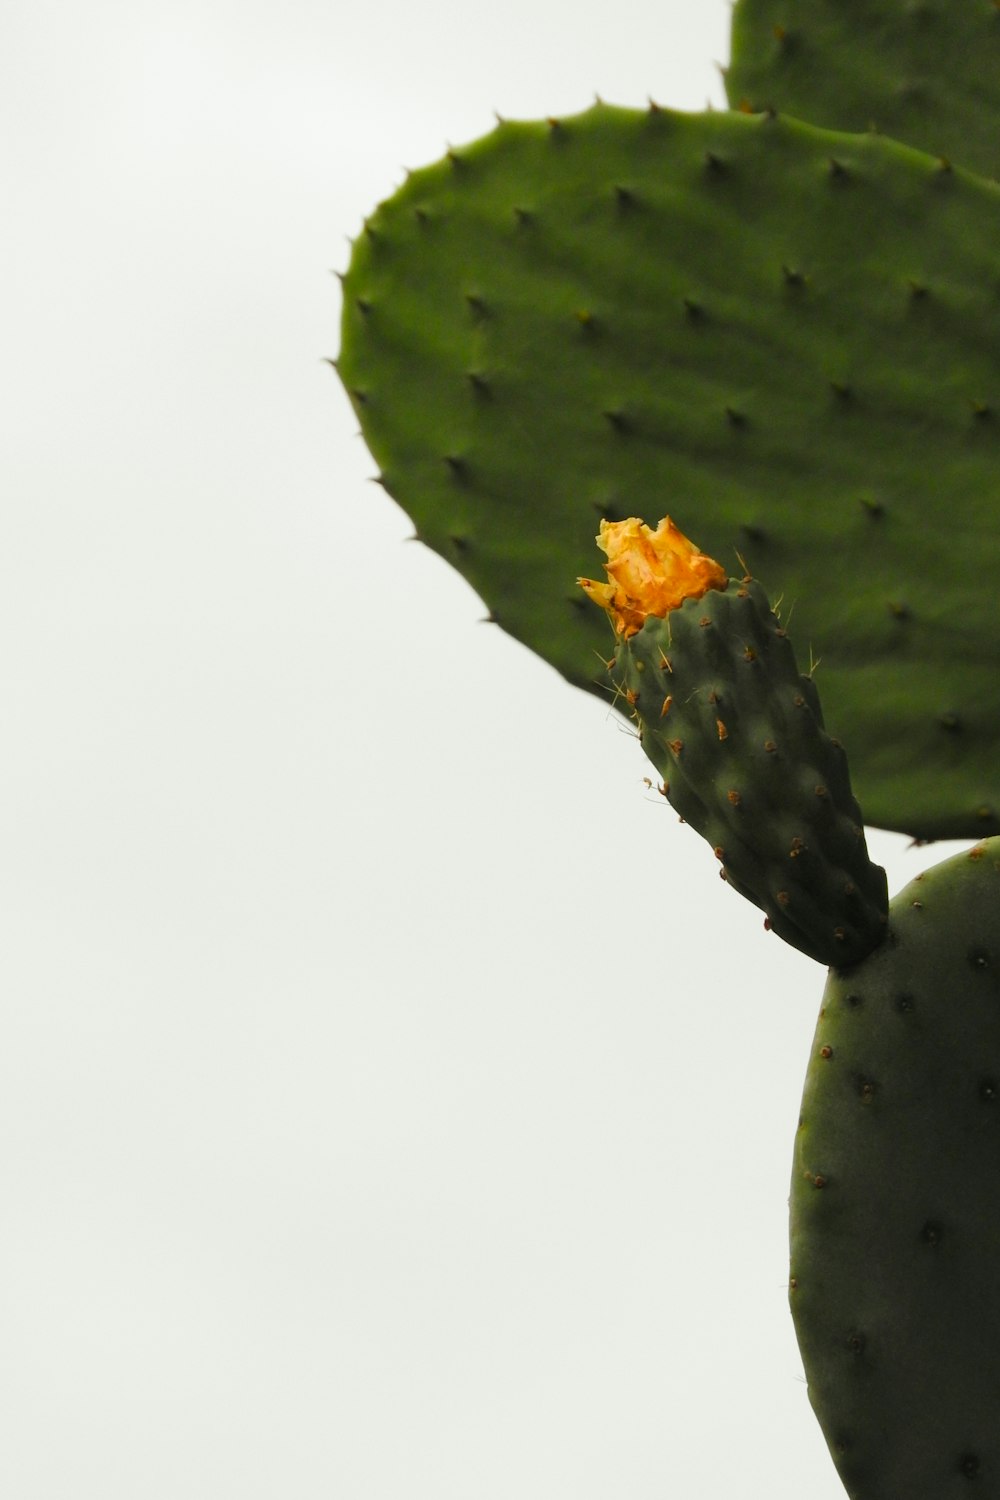 green cactus with yellow flower